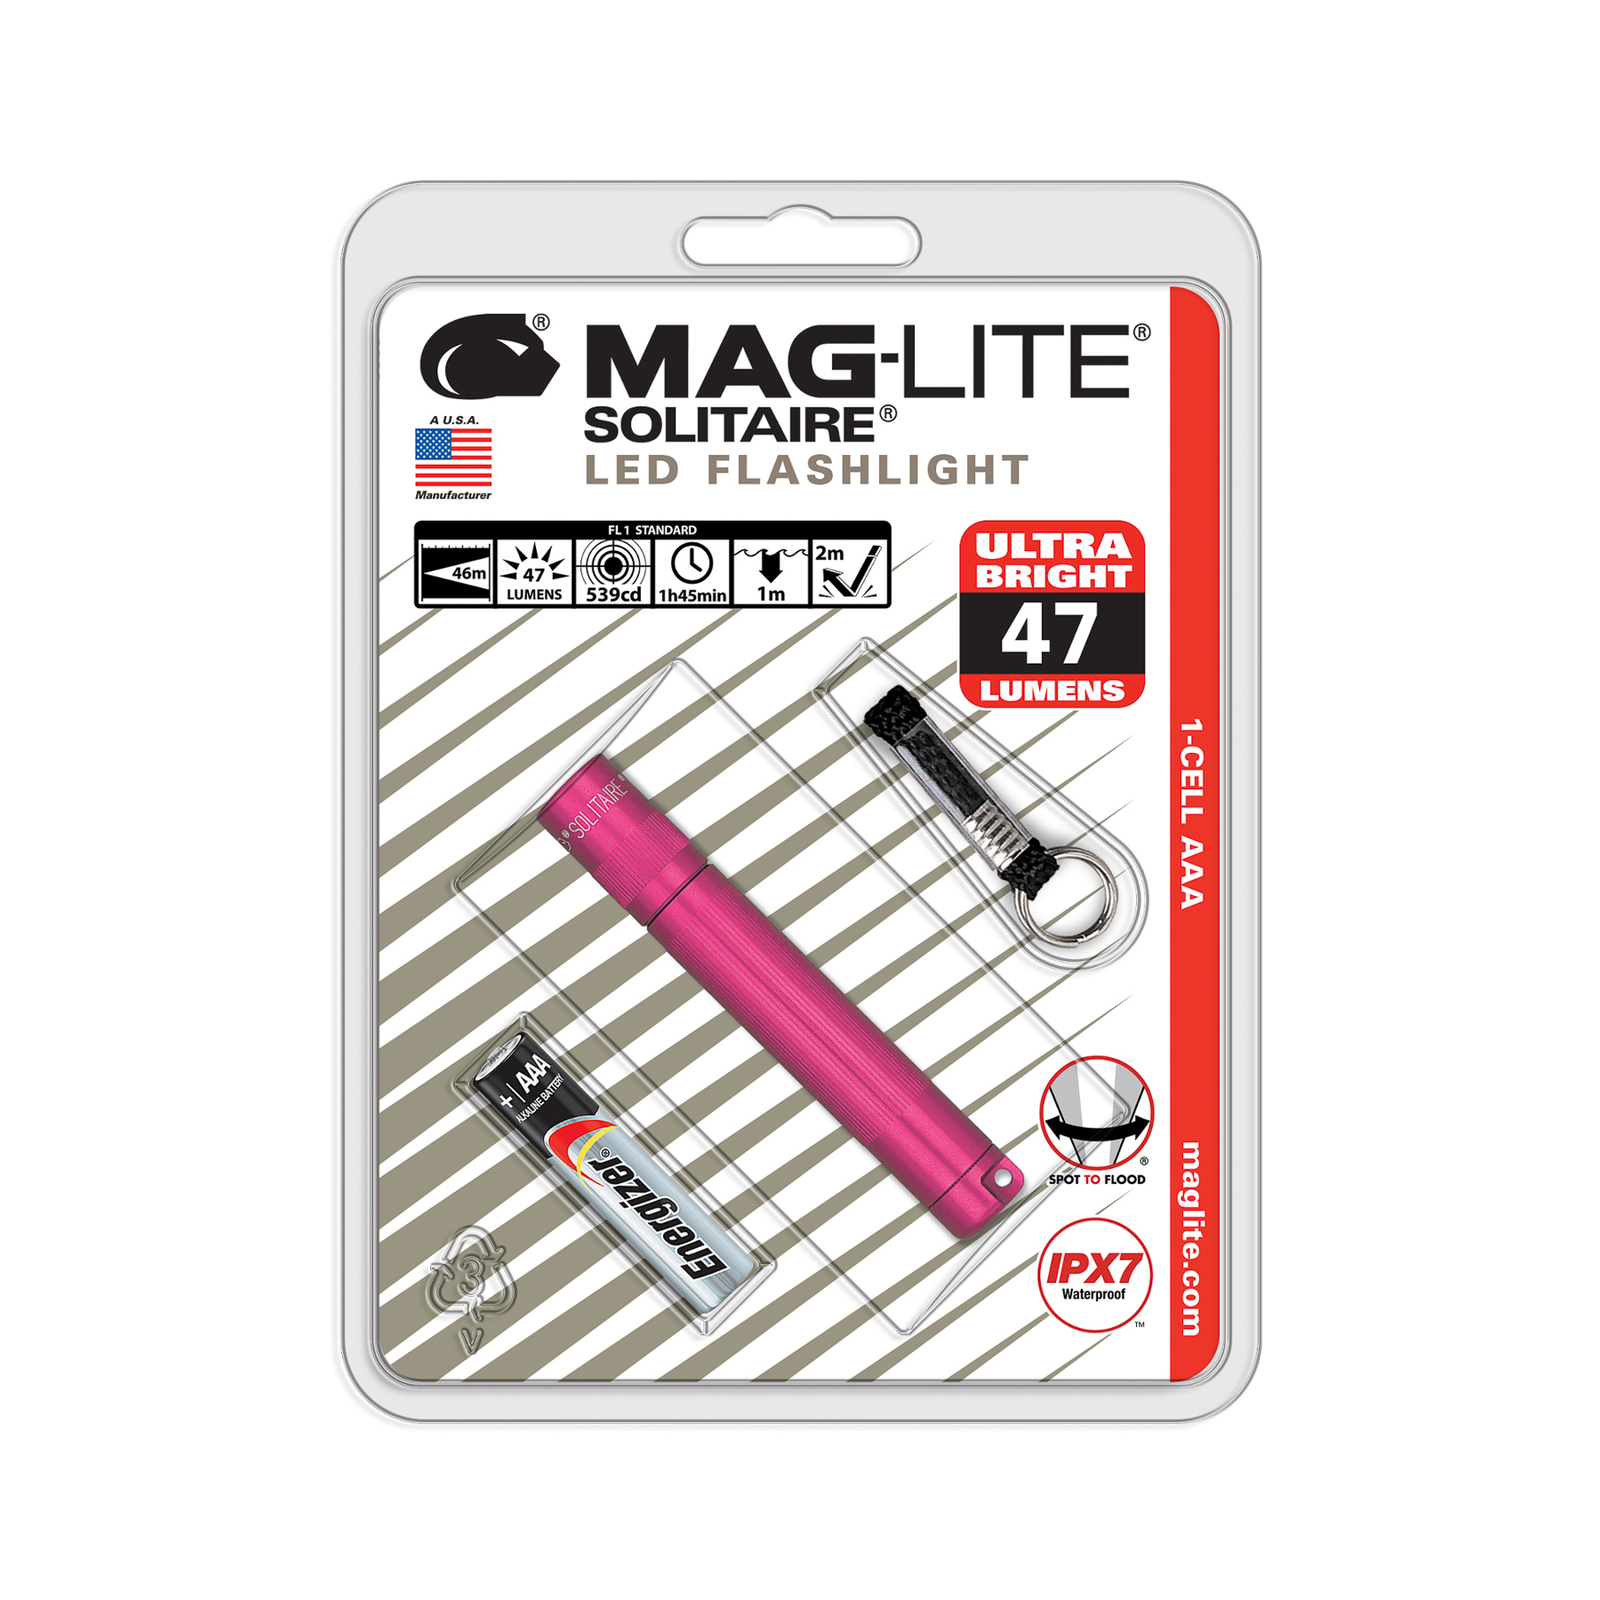 Maglite Linterna LED Solitaire, 1 Cell AAA, rosa